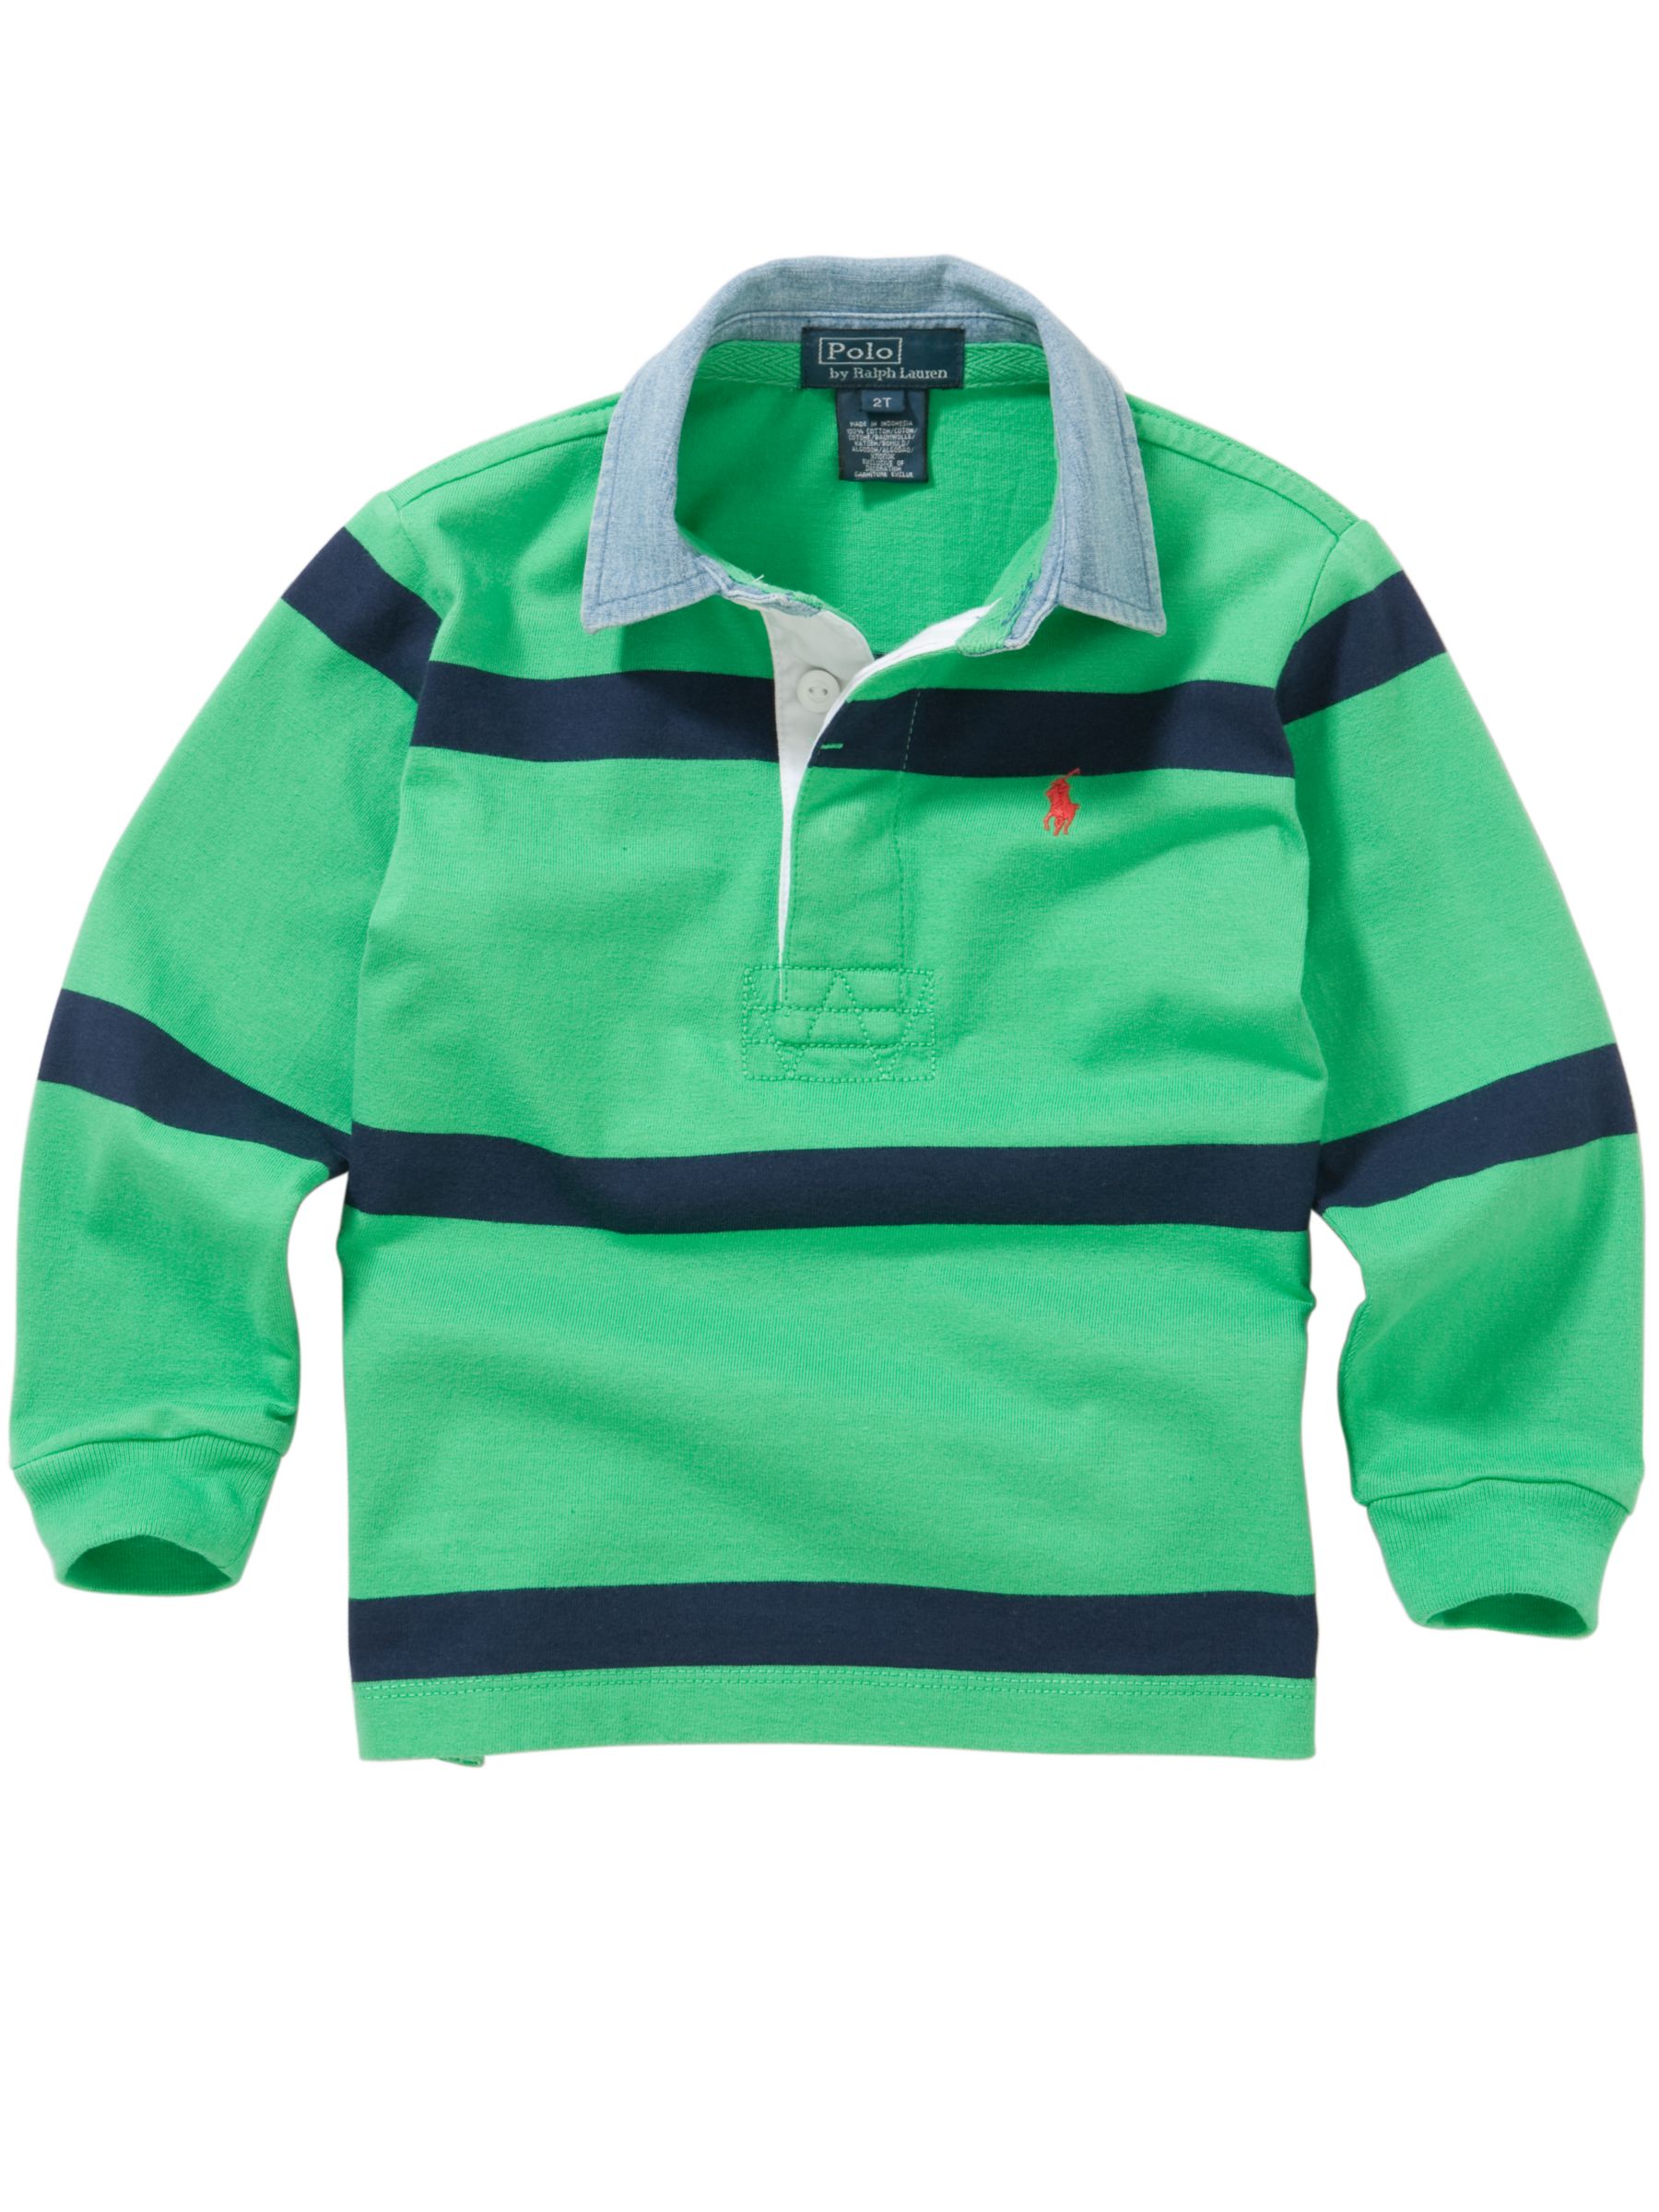 Long Sleeve Rugby Shirt,